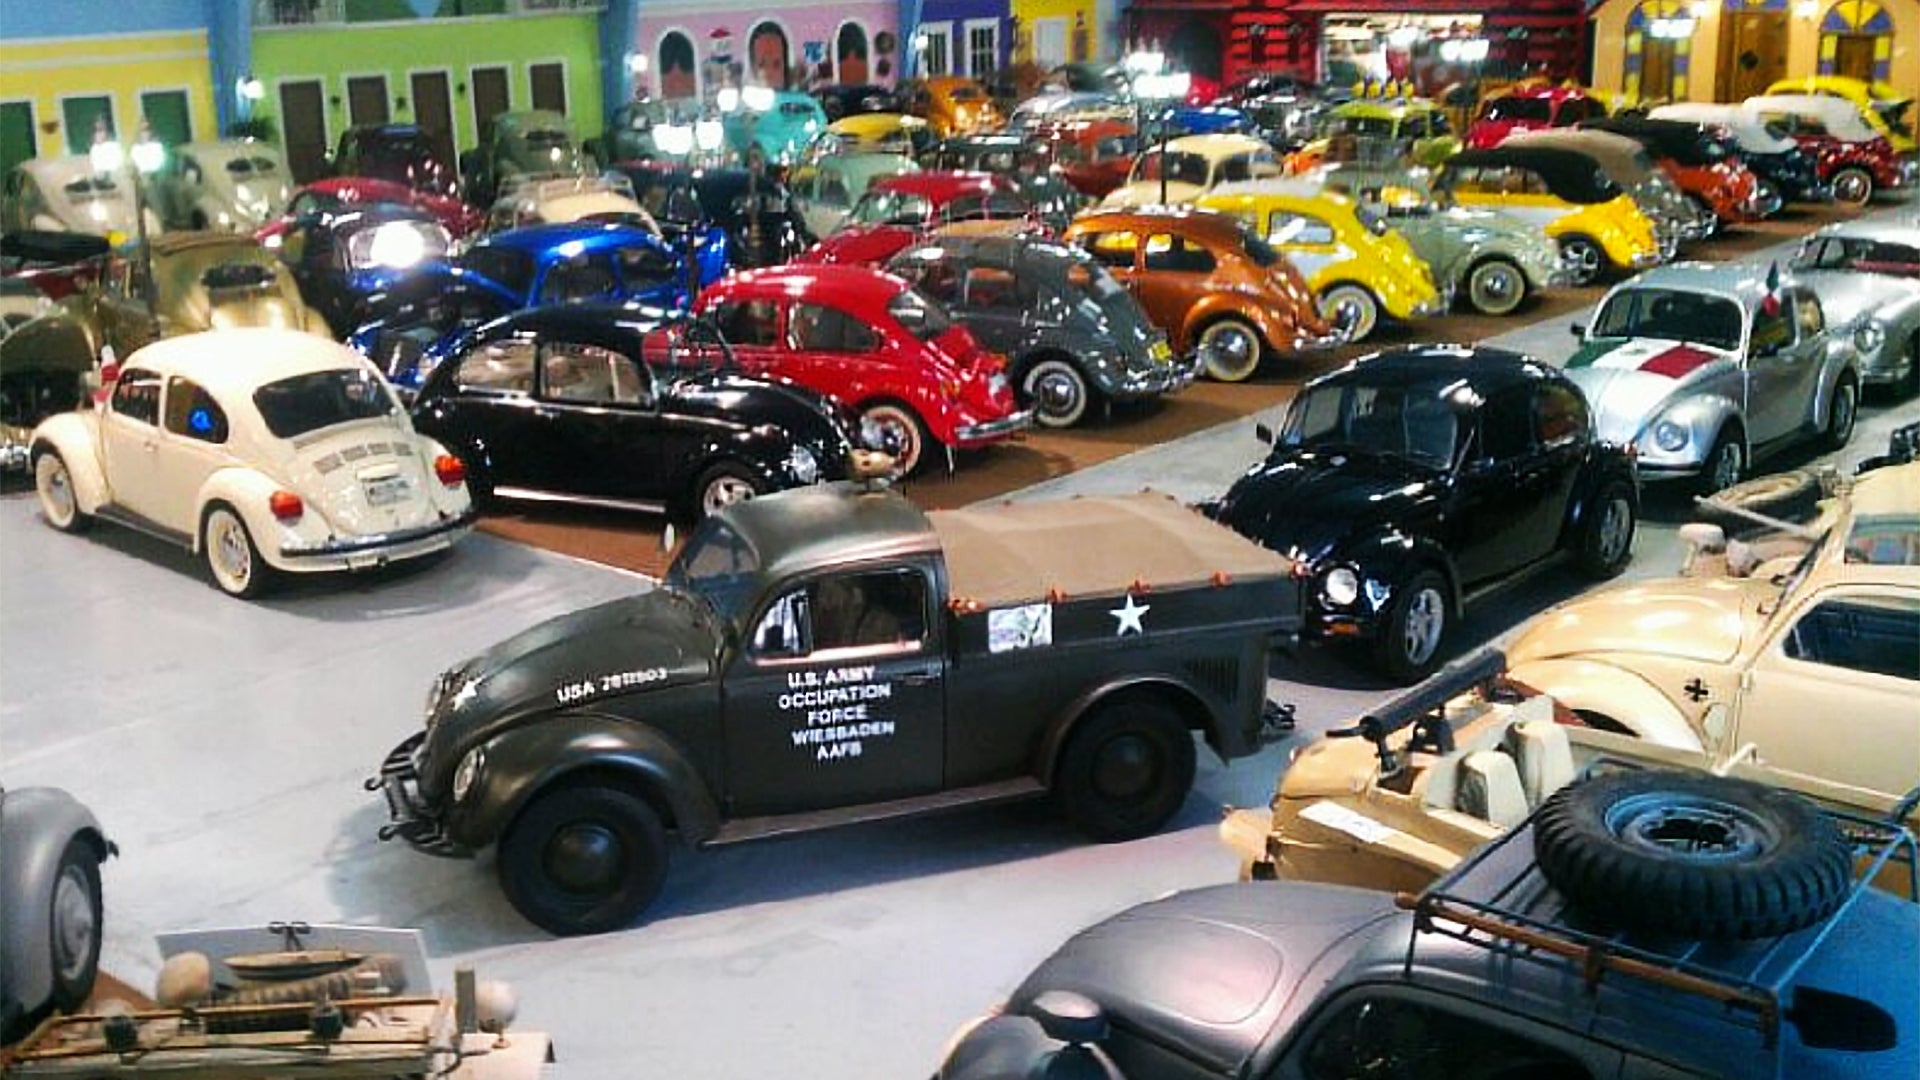 For Sale: The World’s Largest Private Volkswagen Collection